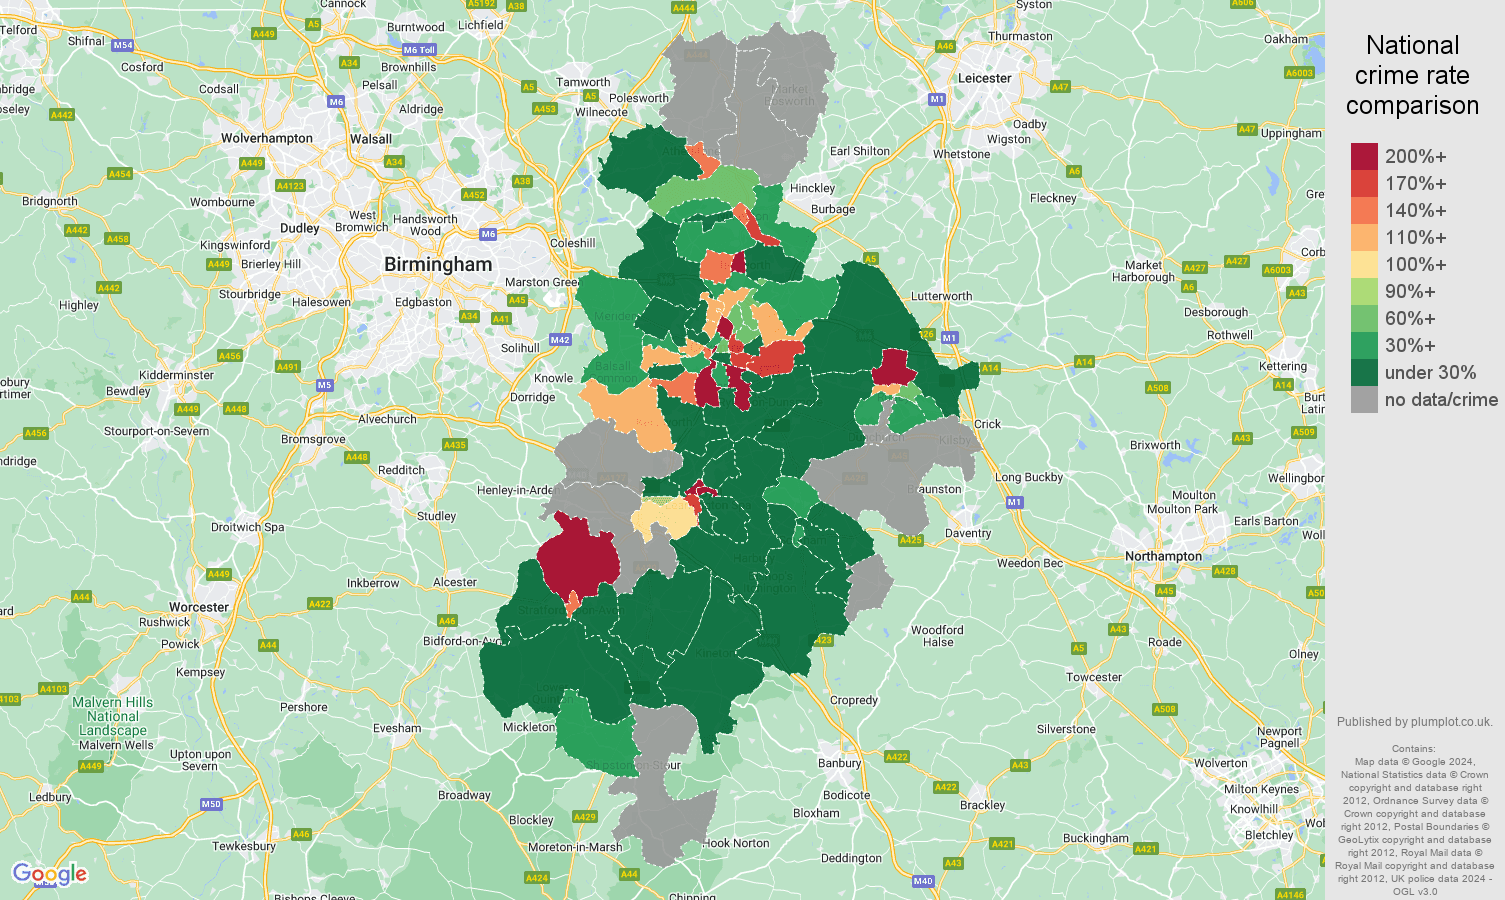 Coventry shoplifting crime rate comparison map